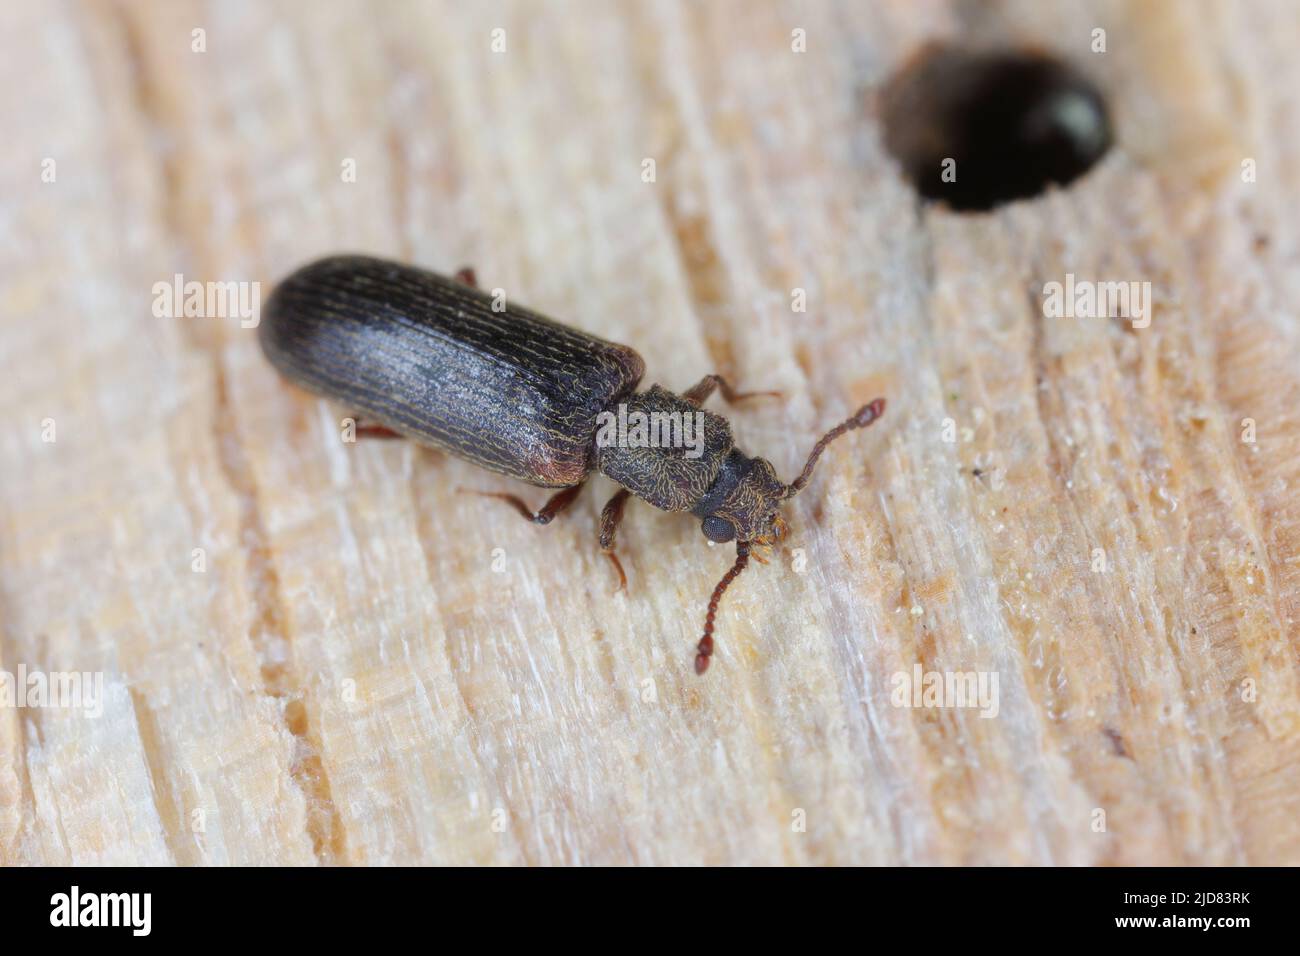 European lyctus beetle - Lyctus linearis. Common wood-destroying insect. Stock Photo